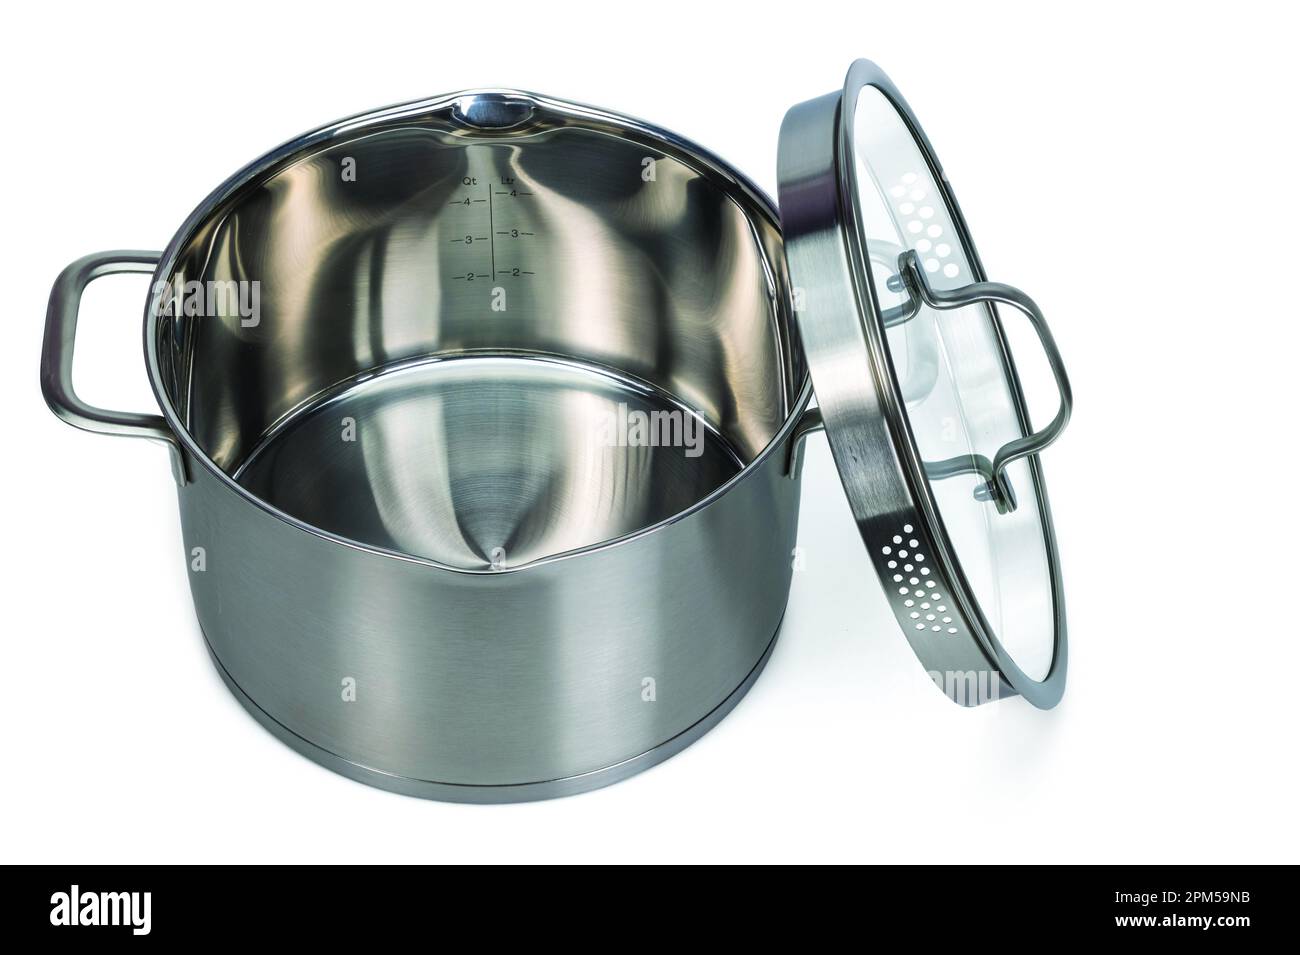 Close-up view of open 4 liter stainless steel saucepan with glass lid on white background. Sweden. Stock Photo